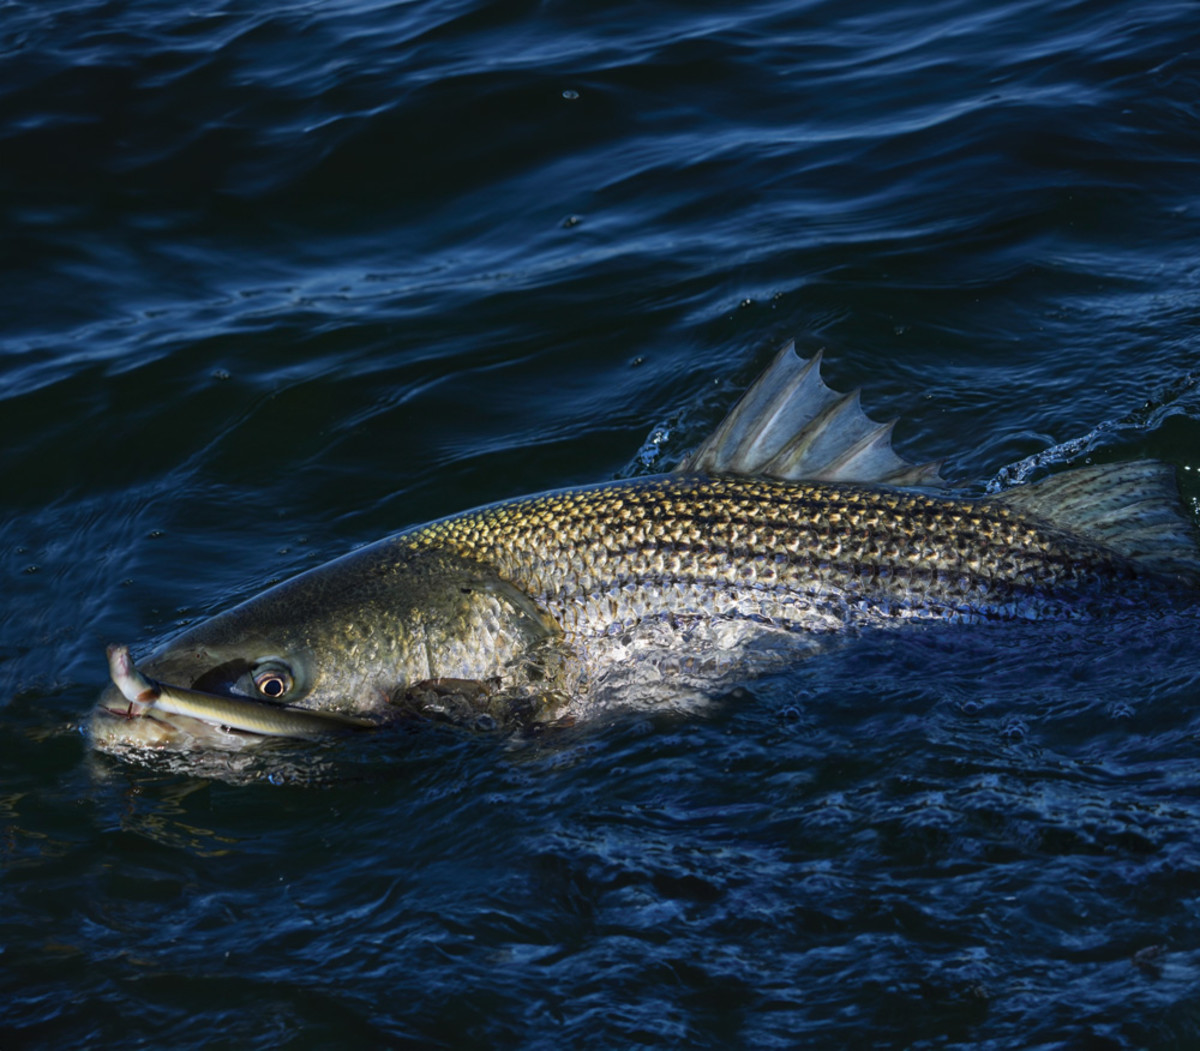  Eel Lures For Striped Bass